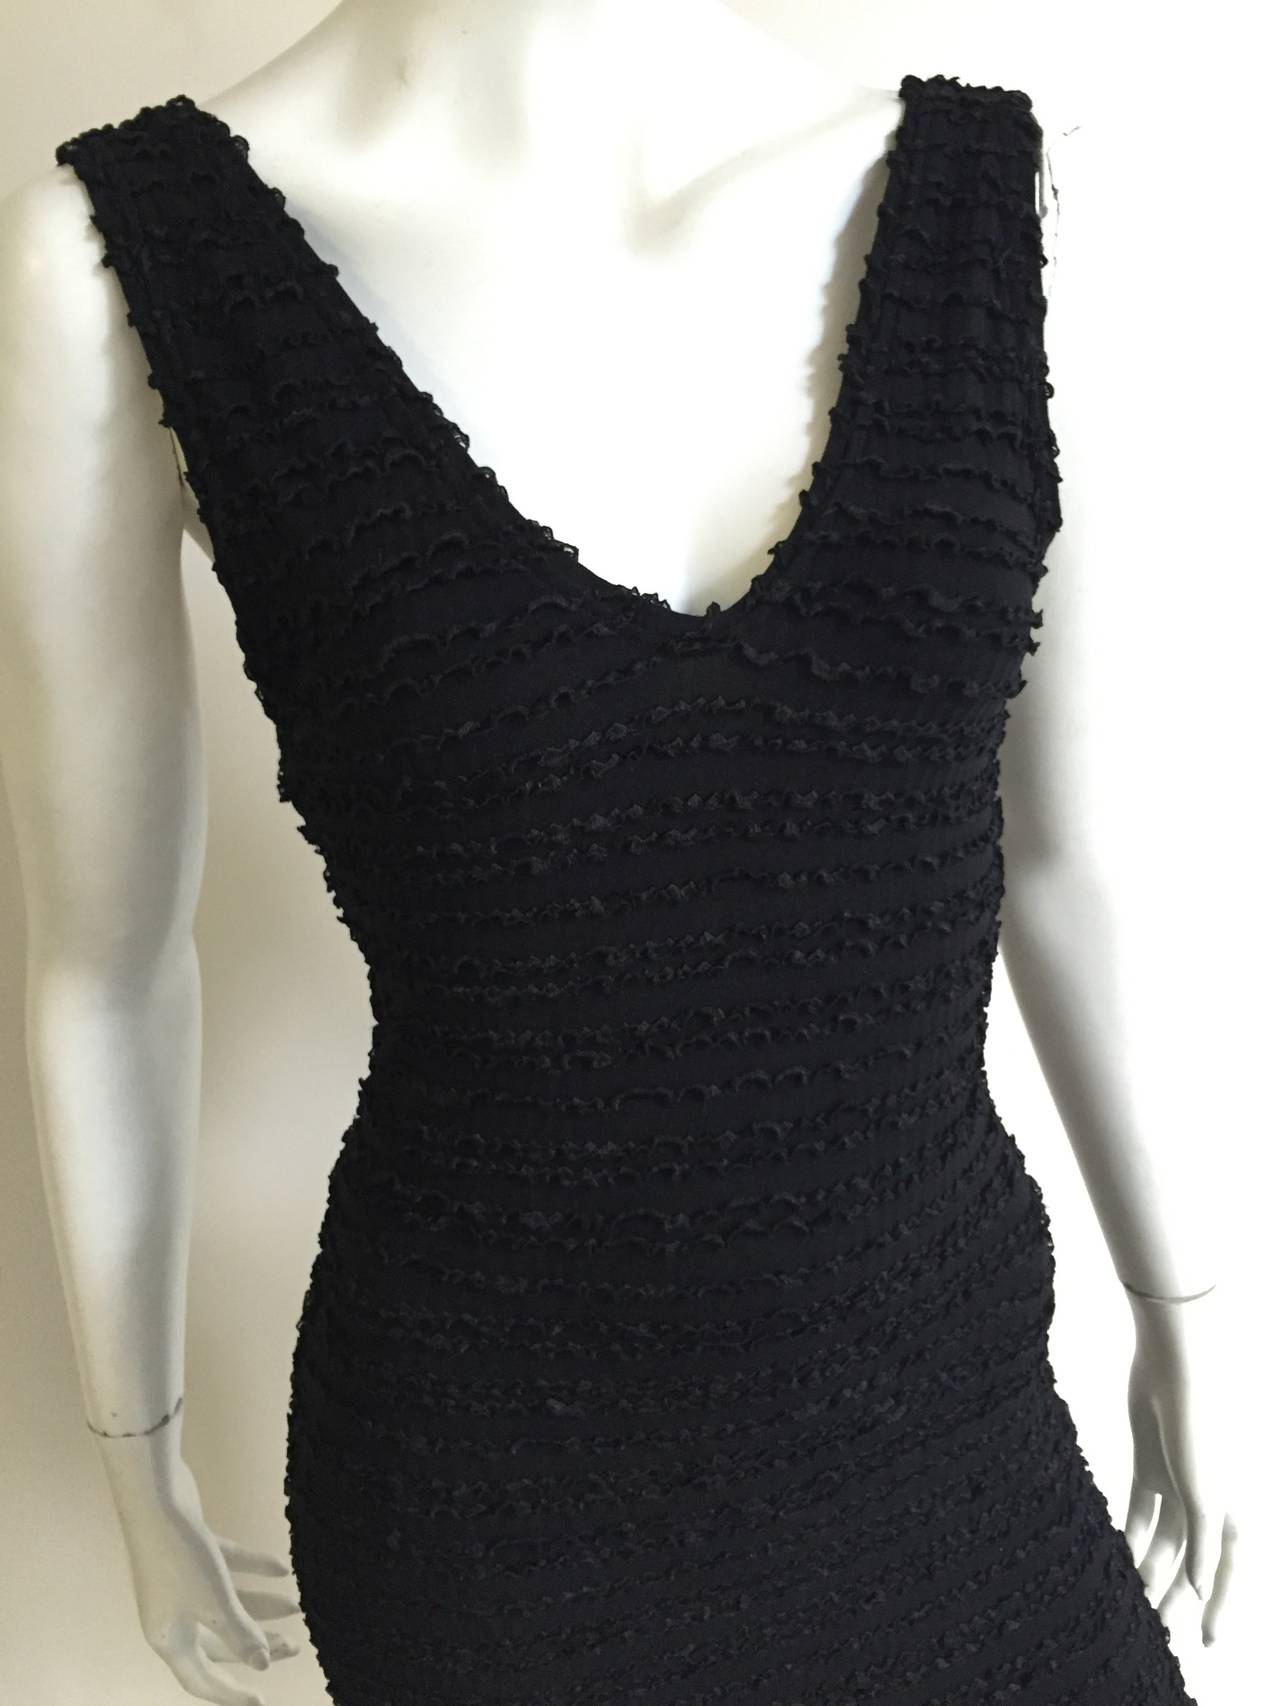 Patrick Kelly Paris 1986 black stretch Flamenco style dress is an original size Medium but fits like a modern day USA size 4 ( Please see & use measurements to properly measure your lovely body). The swoop bottom cut of this dress is timeless. This